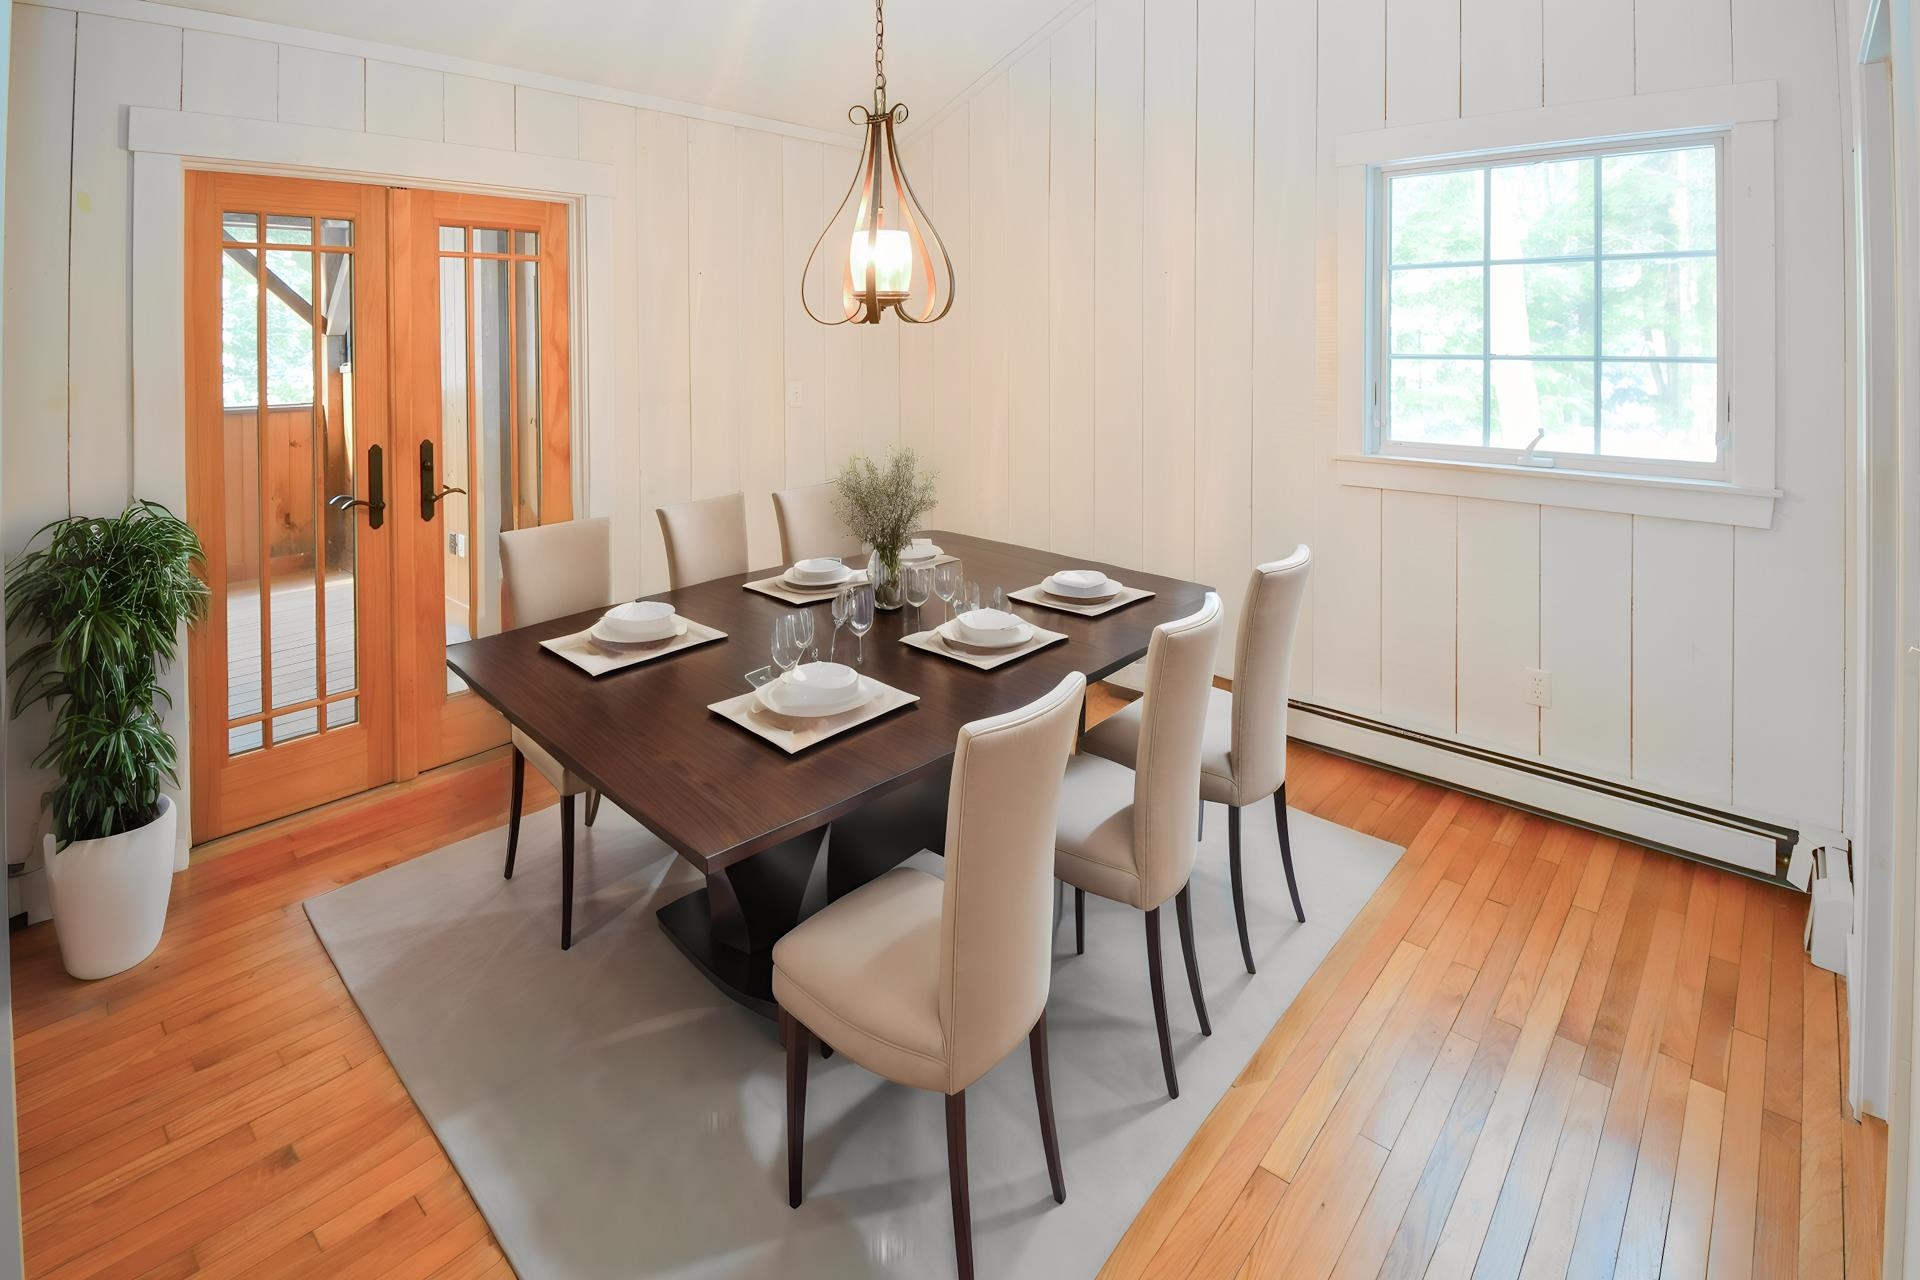 Dining room opens to porch.